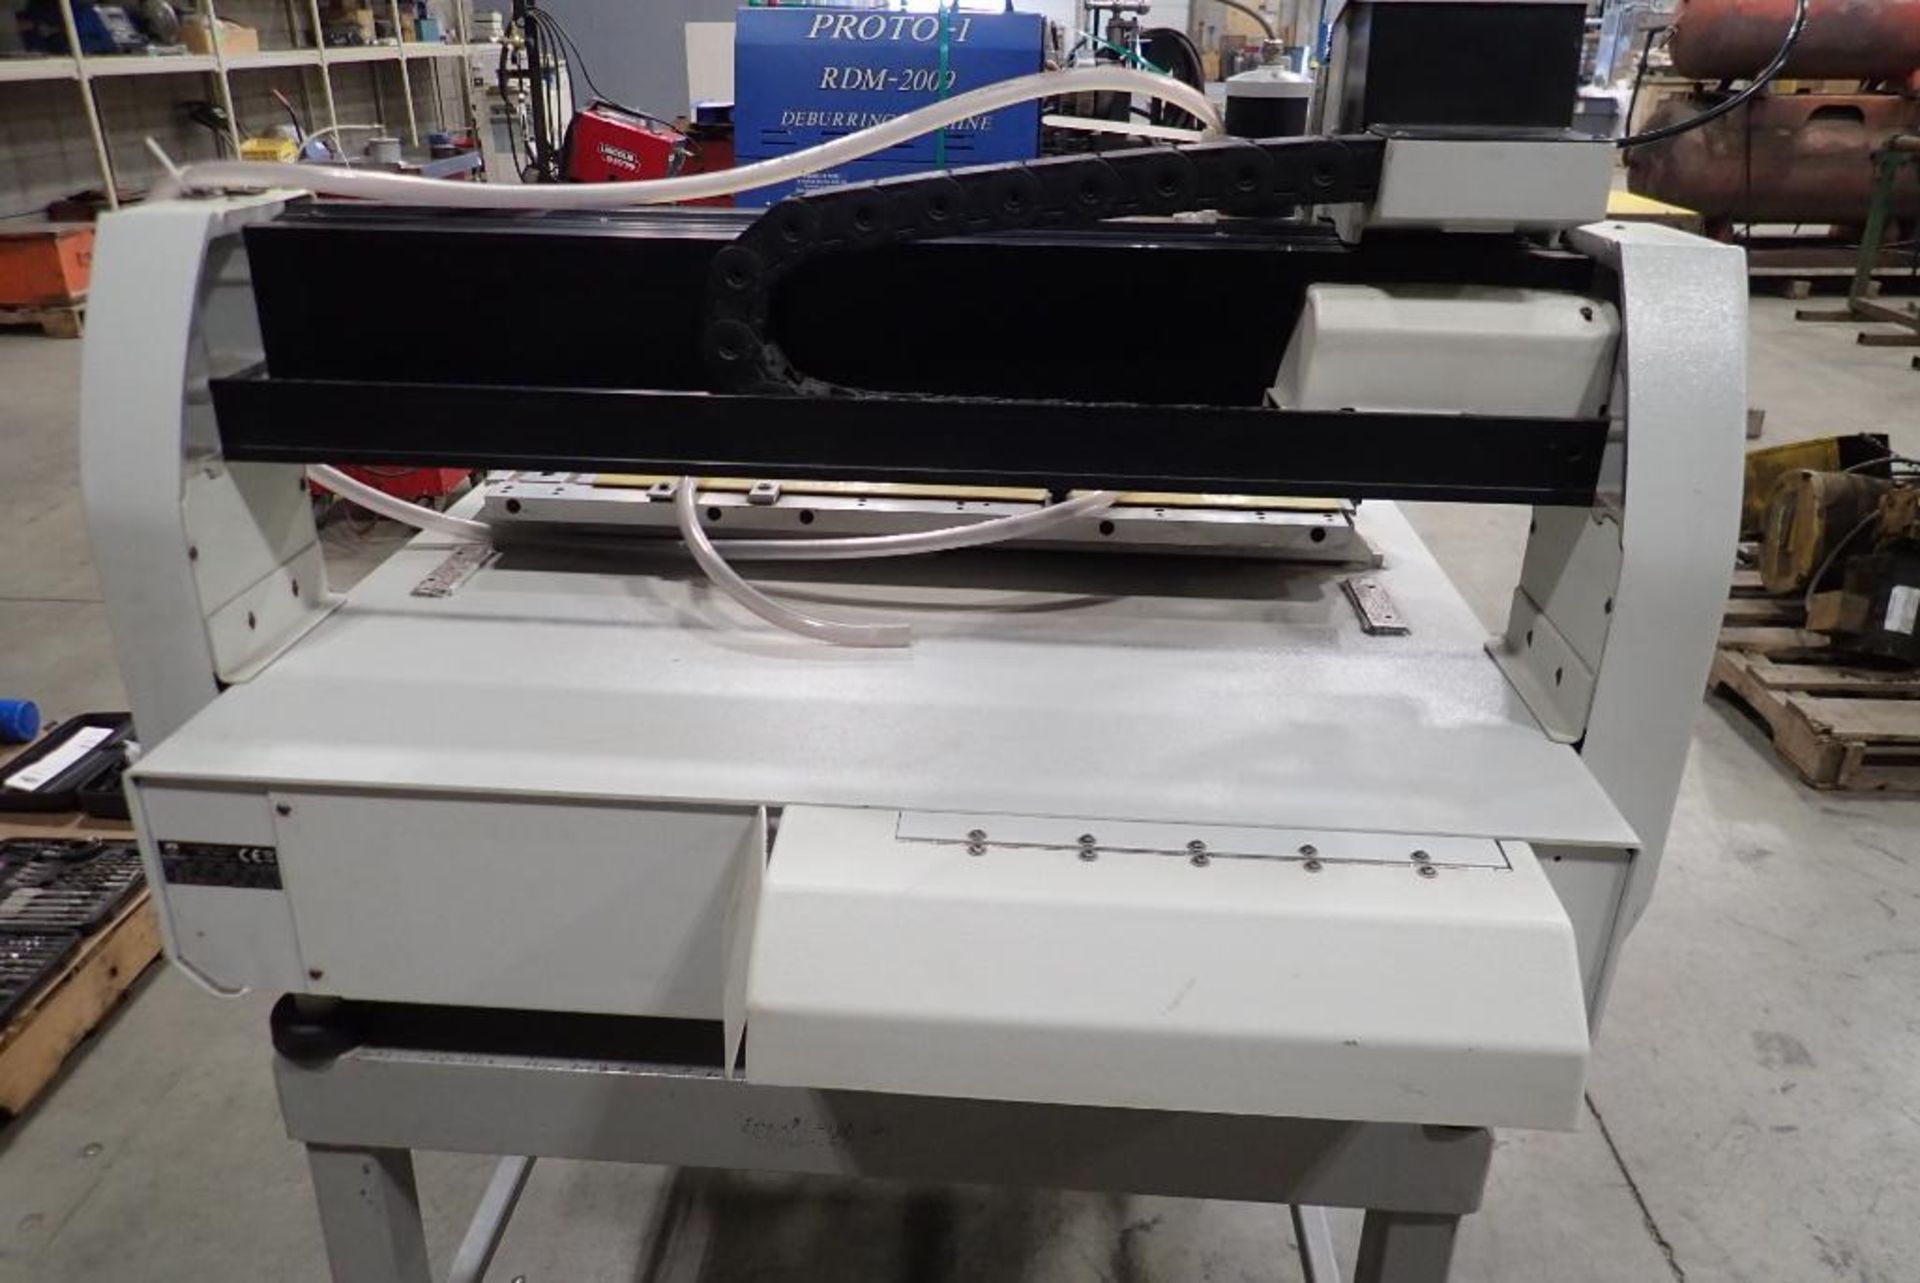 2006 Hermes Gravograph IS6000 Engraving Machine w/ Asst. Accessories, etc. - Image 3 of 6